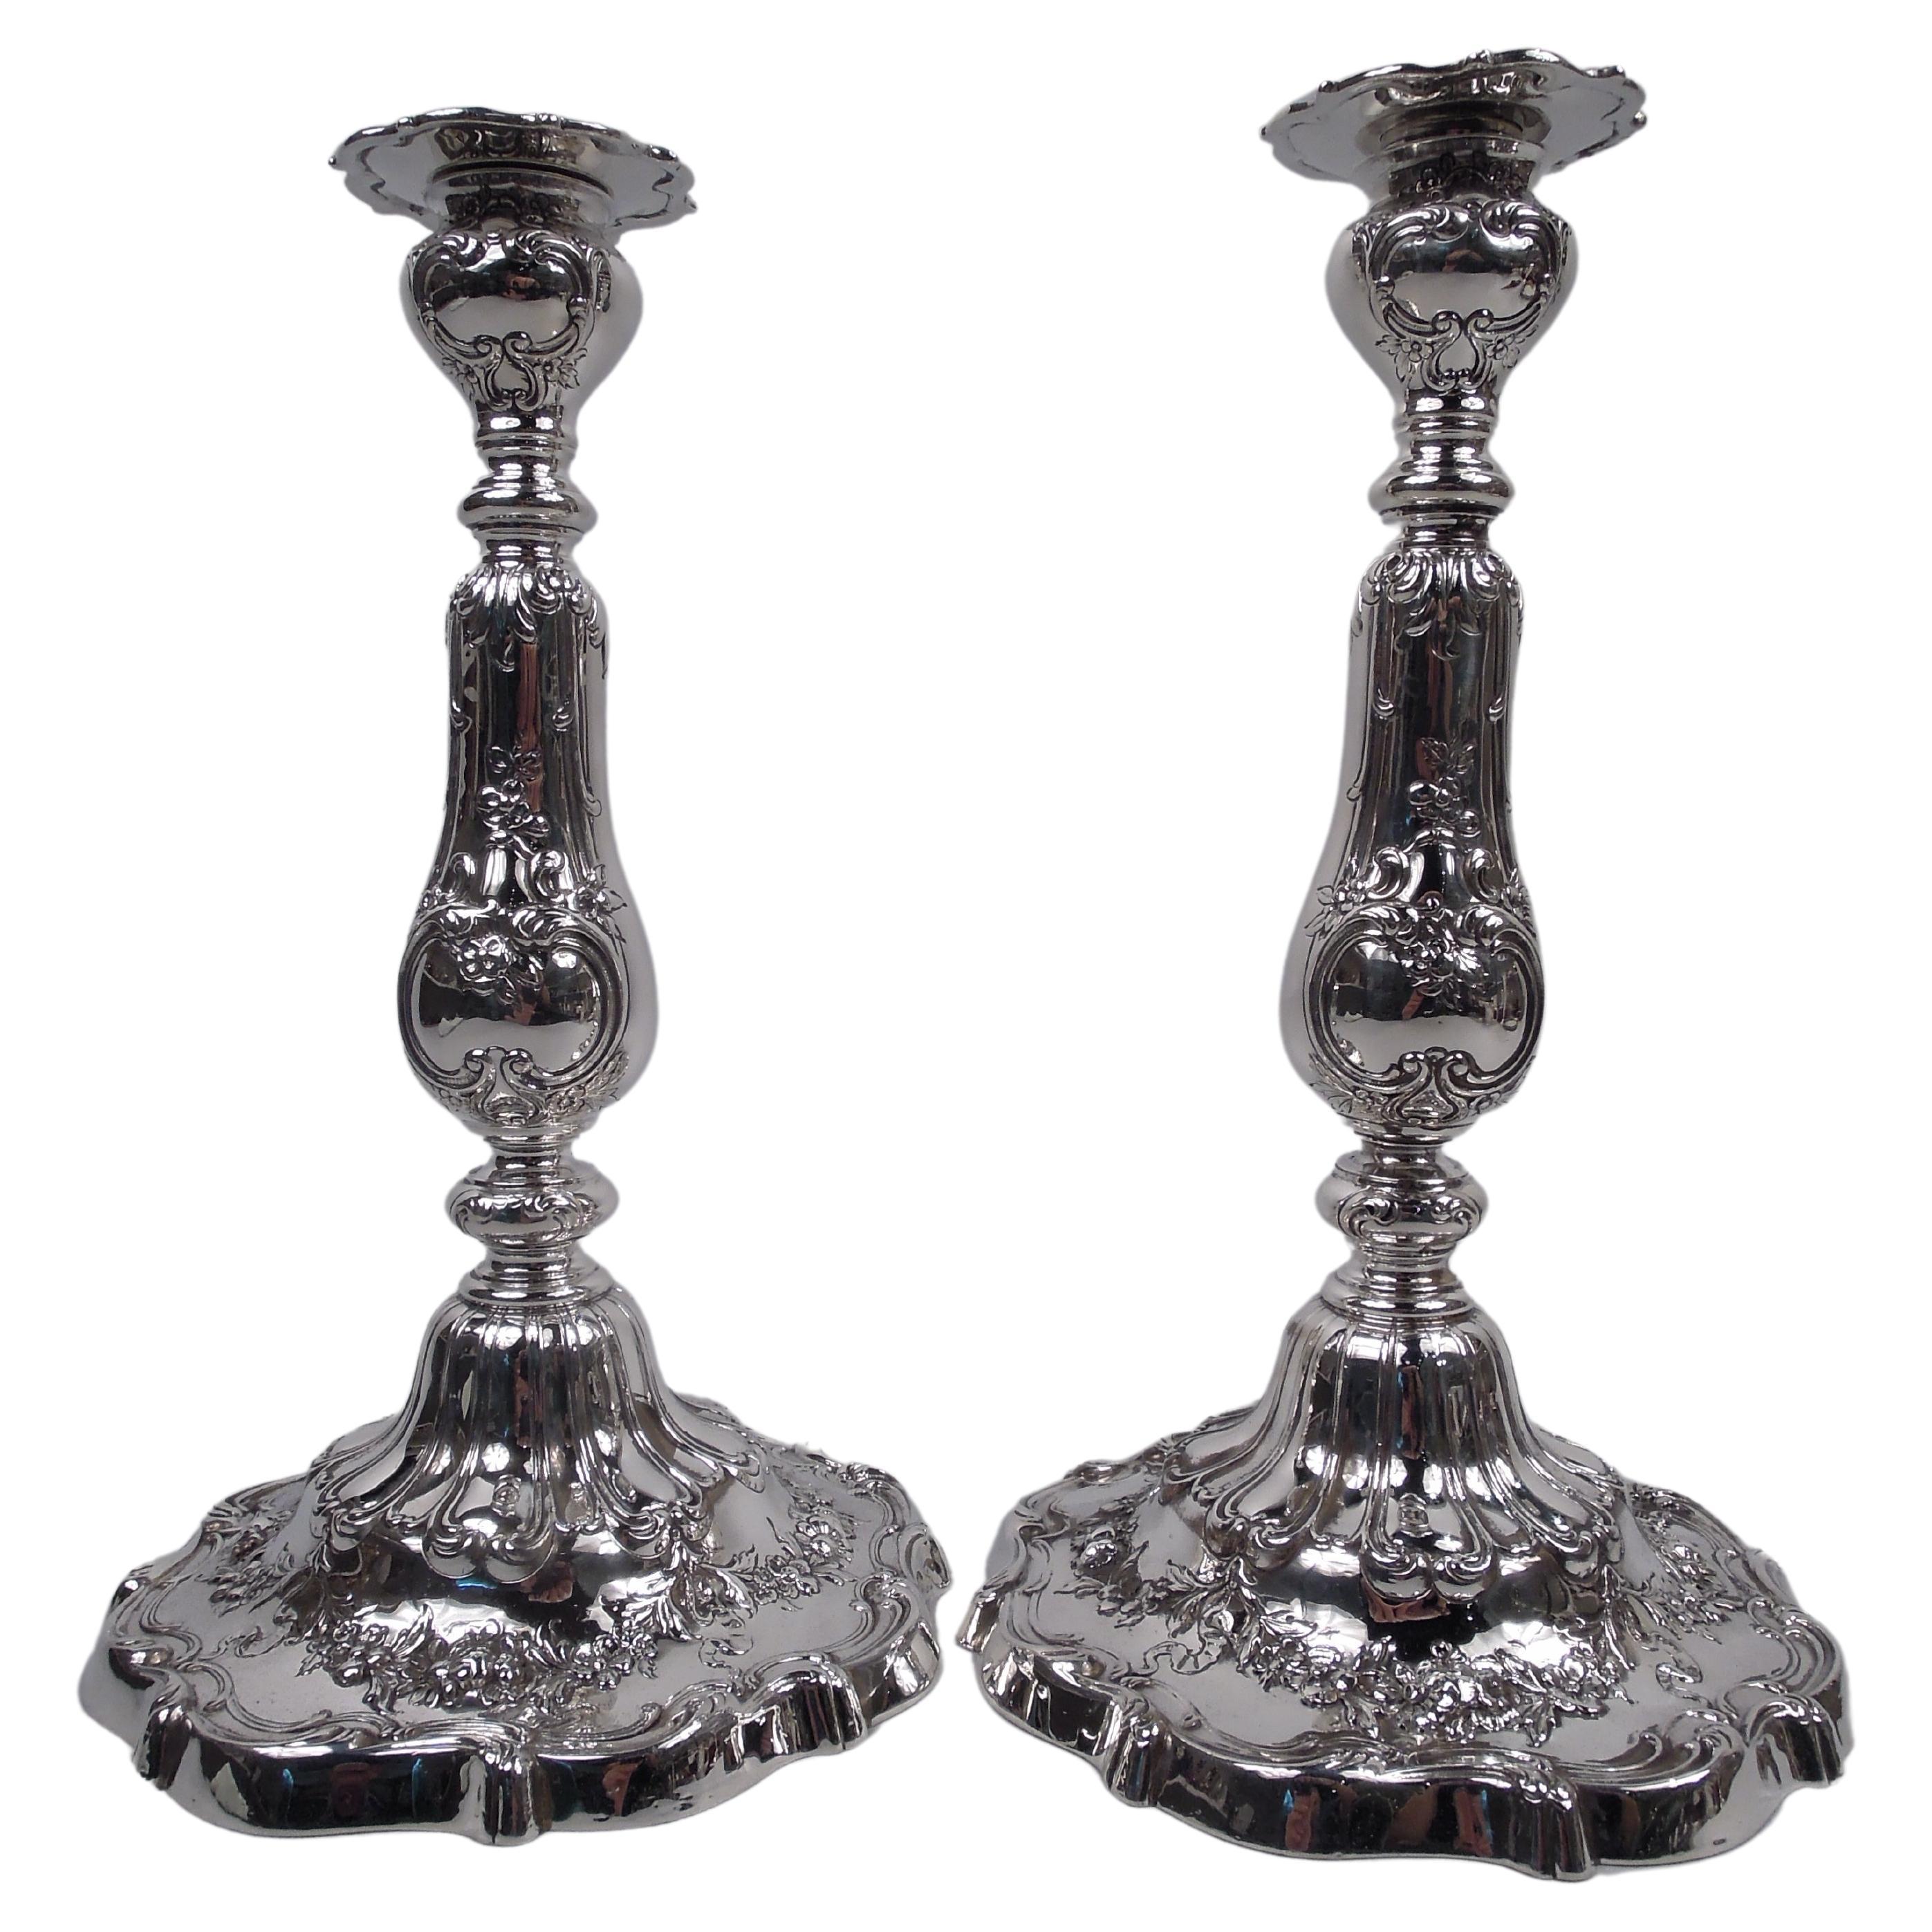 Pair of Gorham Edwardian Classical Sterling Silver Candlesticks, 1914